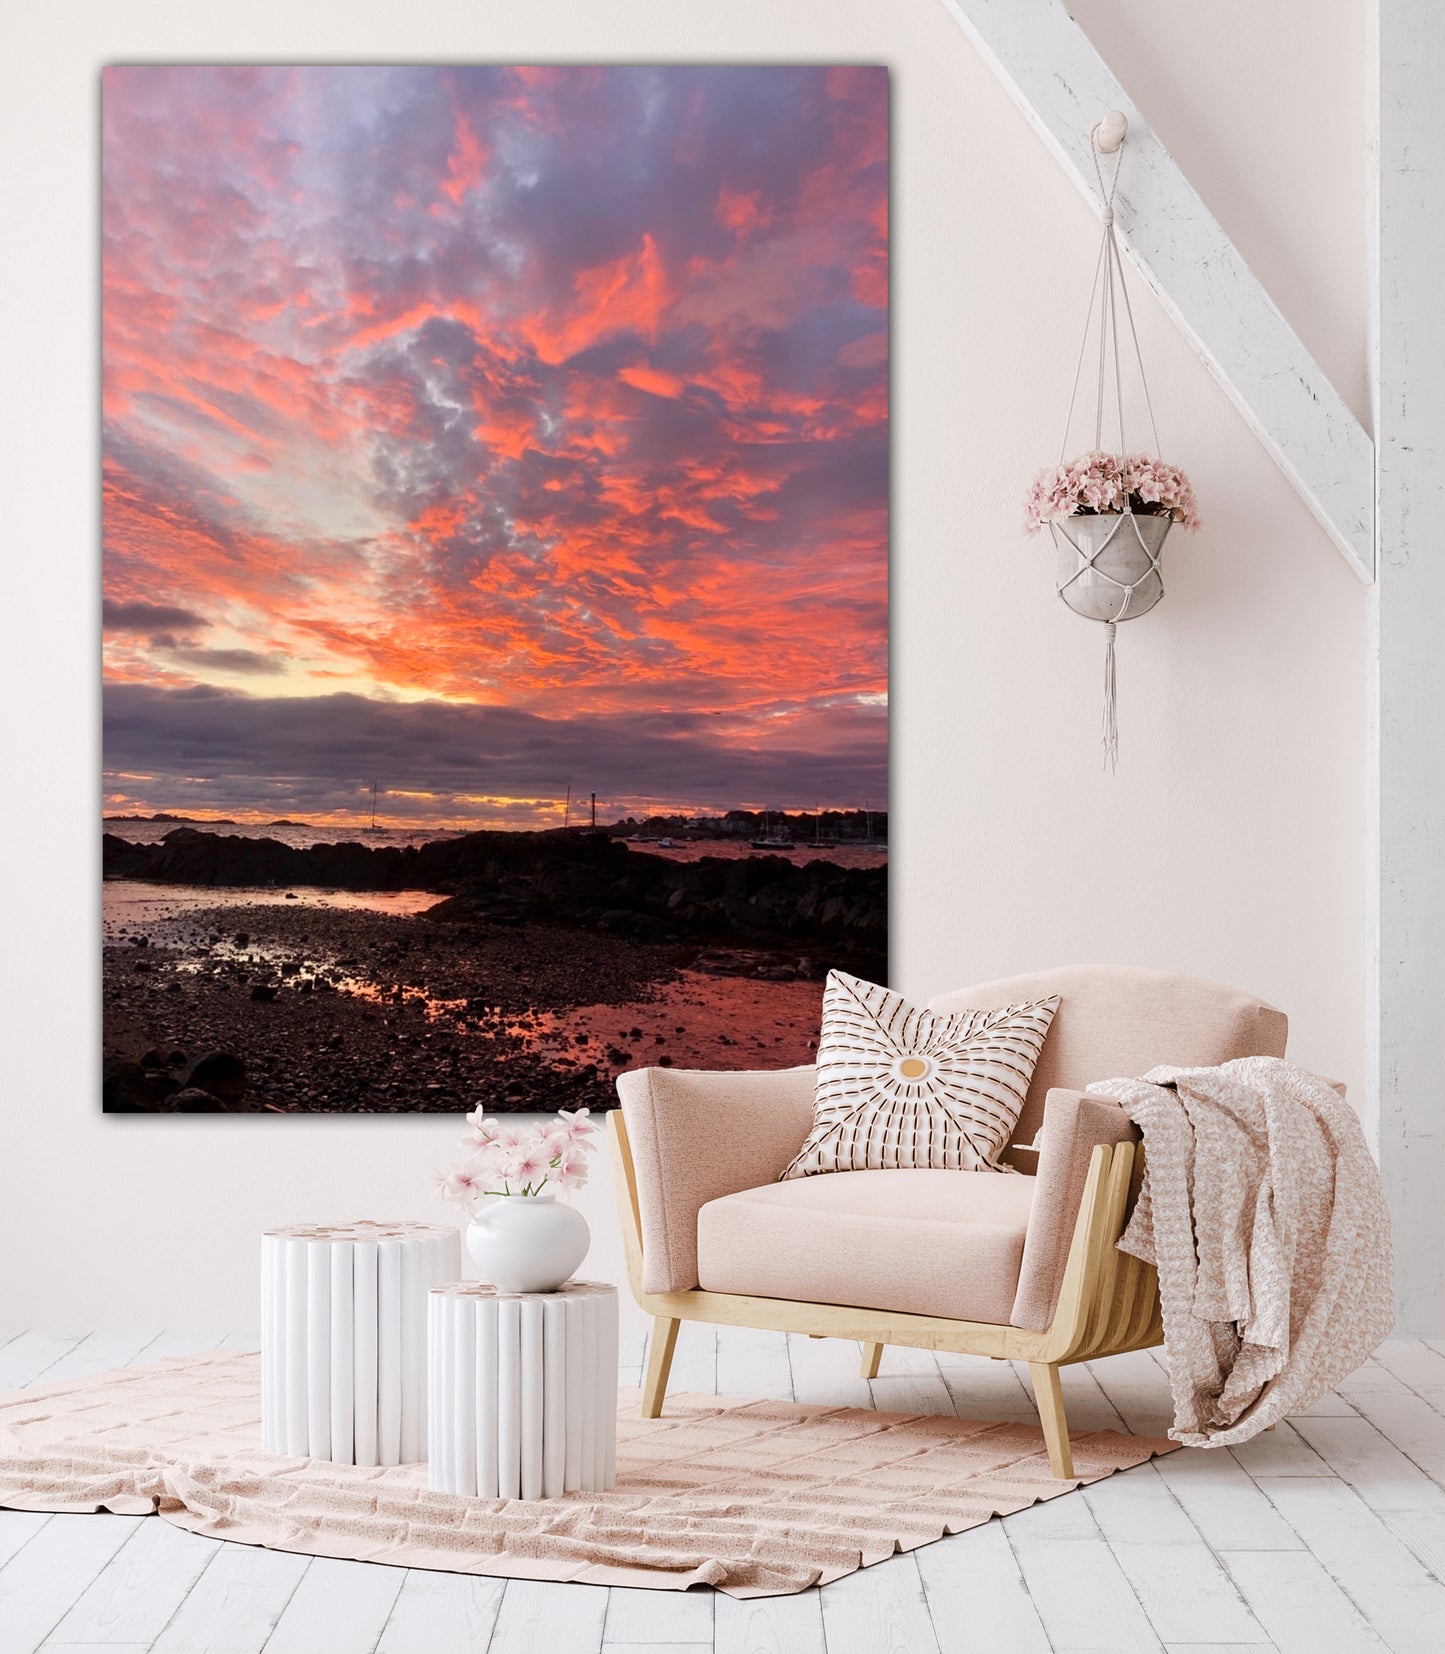 Red Sky Sunrise over Marblehead - Classic Canvas Print